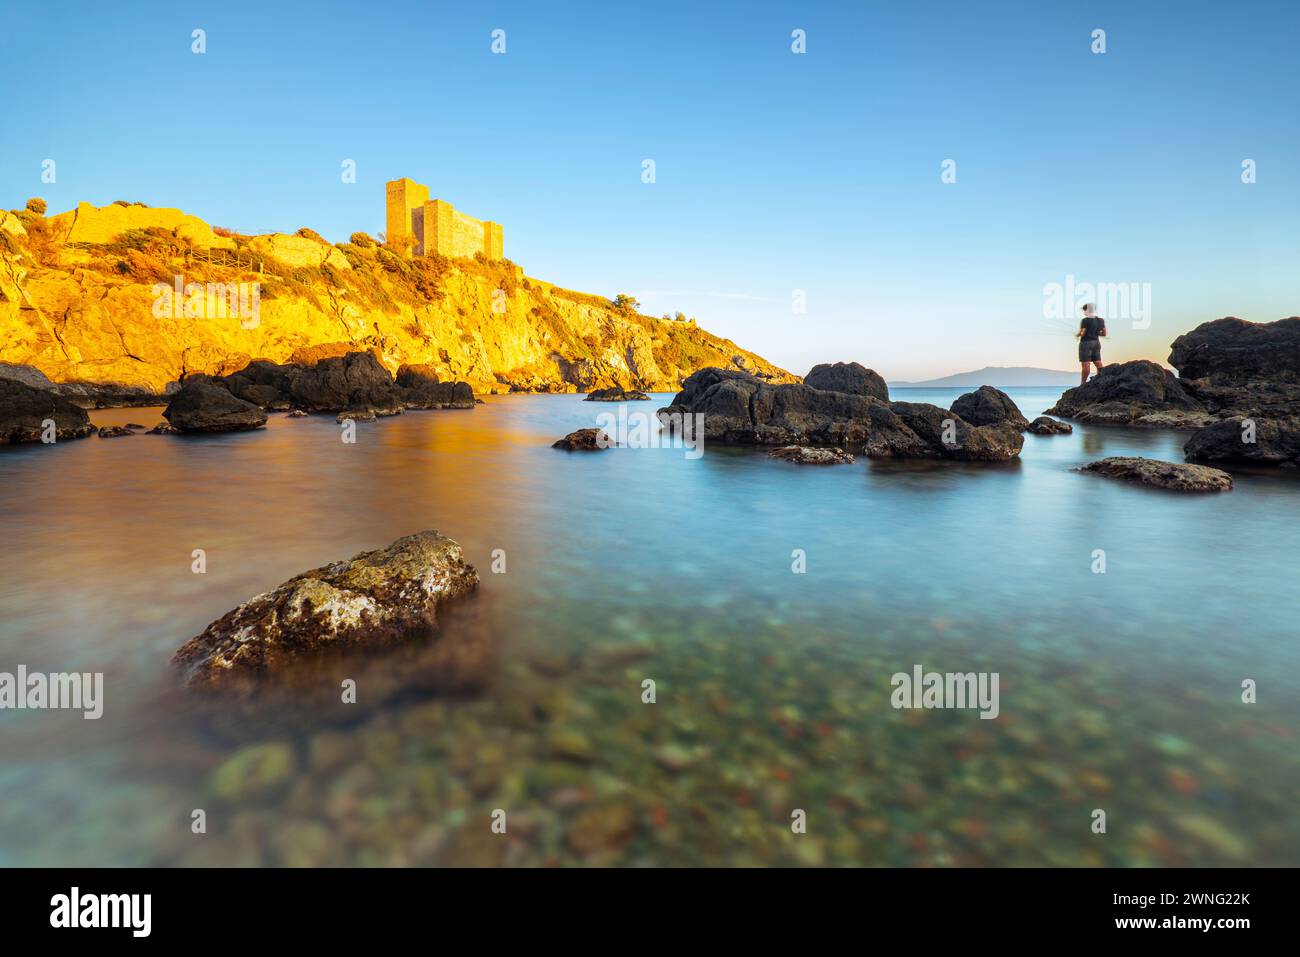 The Rocca Aldobrandesca castle on the rocky coast of the Maremma in Talamone in the golden sunset, Tuscany, Italy Stock Photo